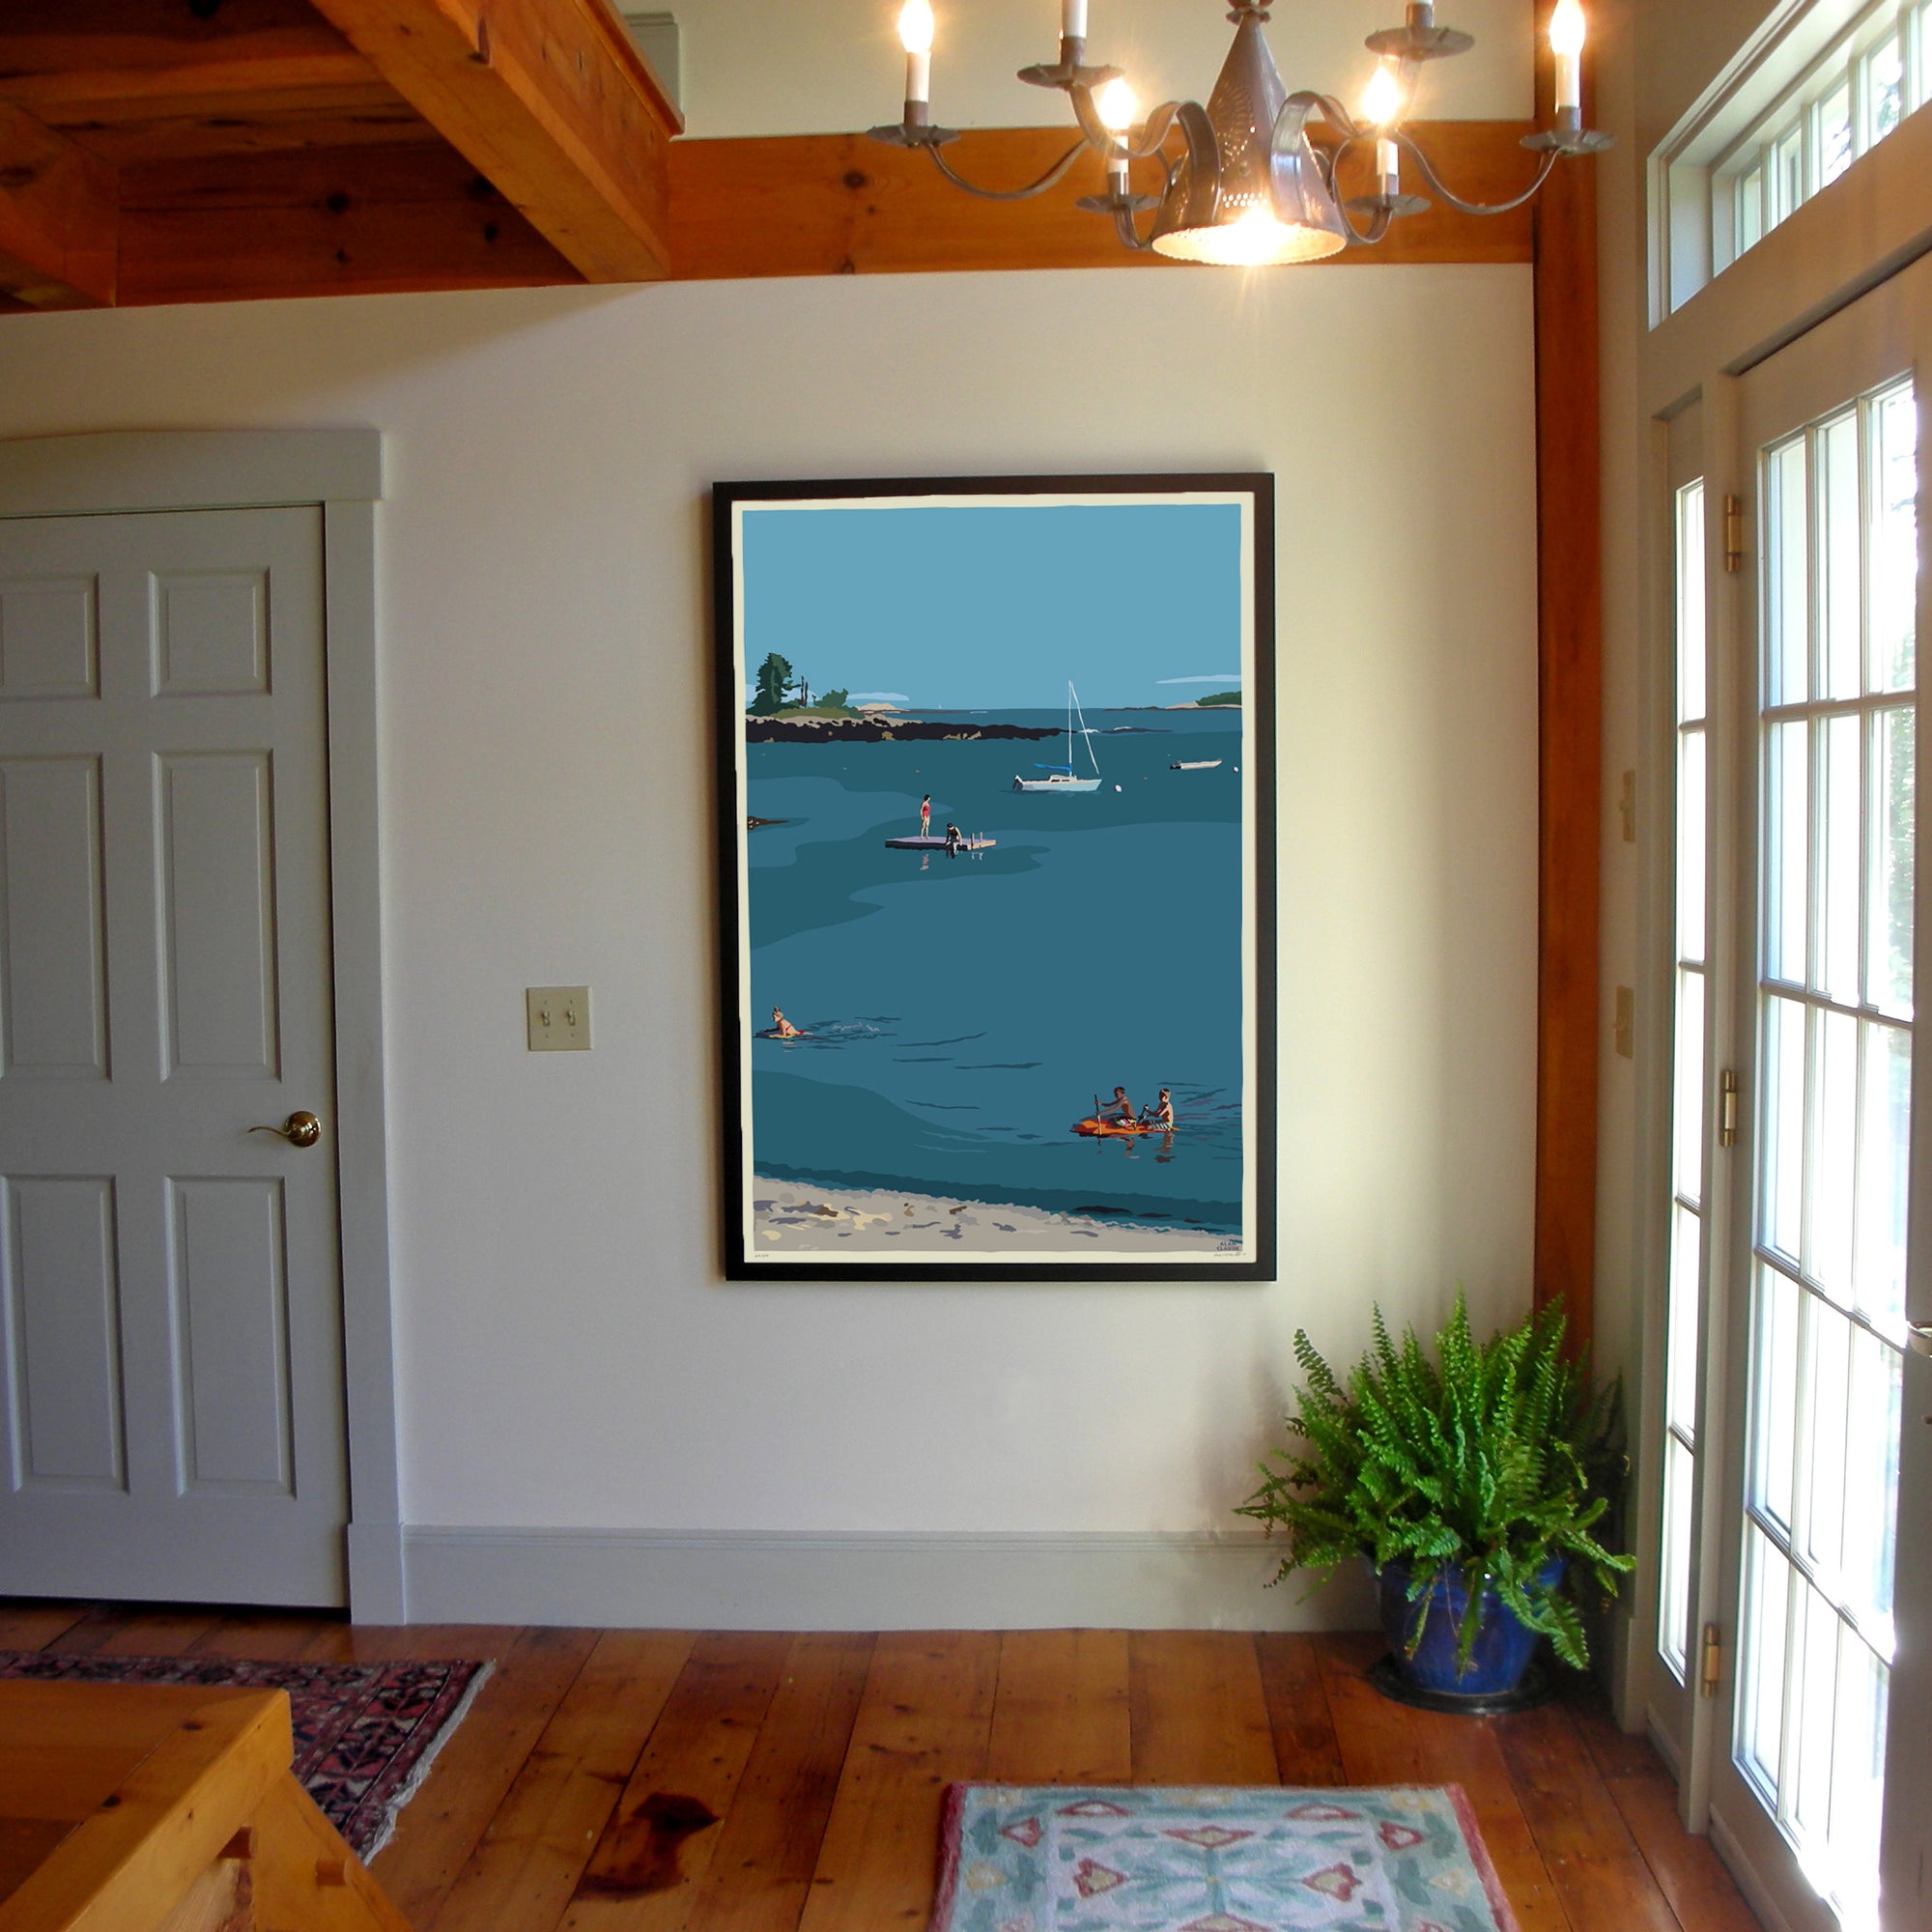 Ocean Point Swimmers Art Print 36" x 53" Framed Wall Poster By Alan Claude - Maine